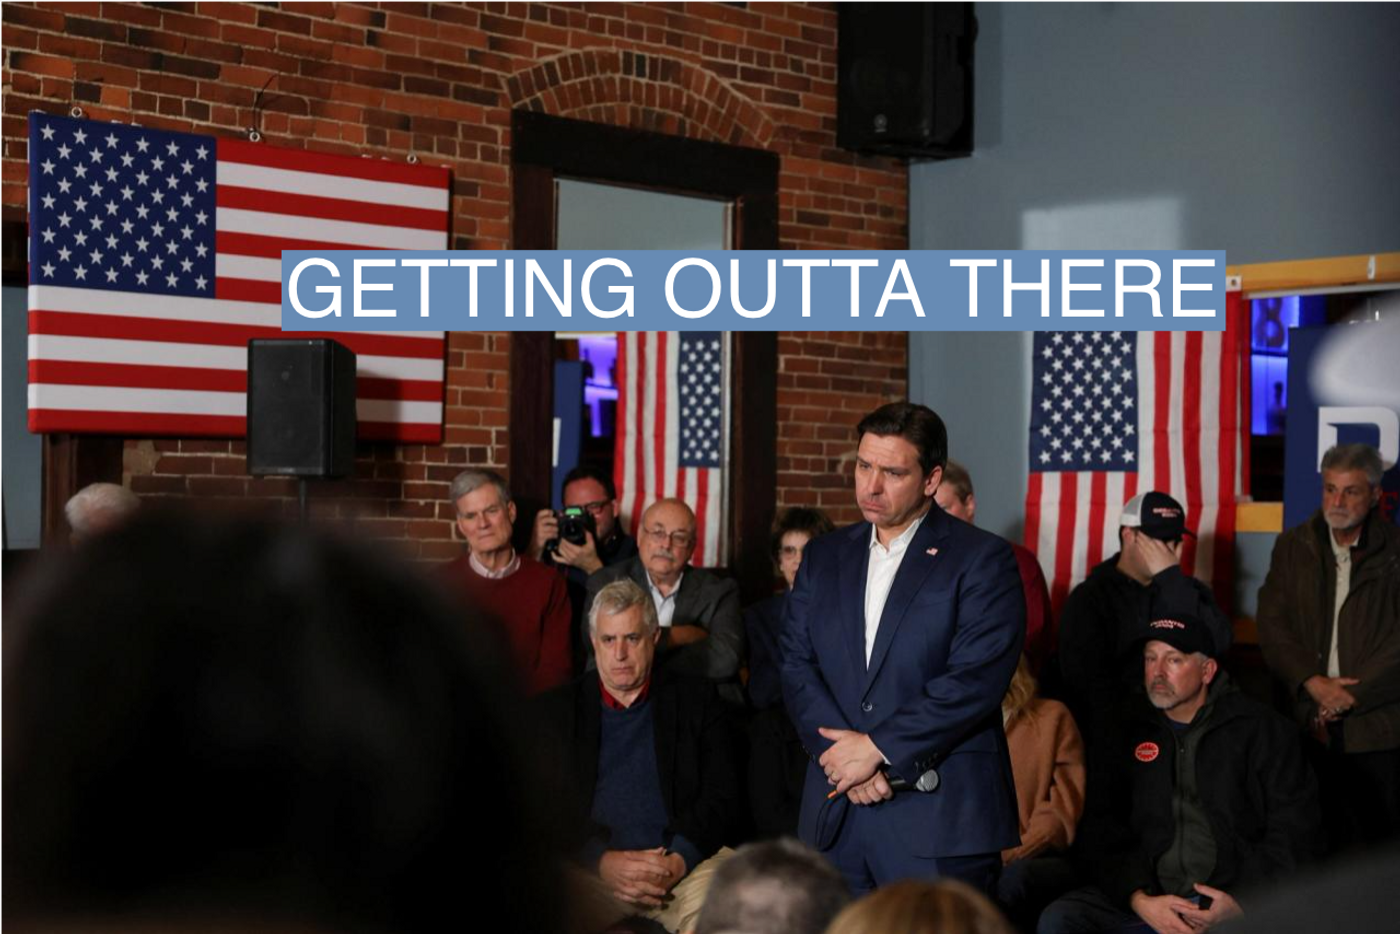 Republican presidential candidate and Florida Governor Ron DeSantis makes a campaign visit ahead of the New Hampshire primary election at Cara Irish Pub & Restaurant in Dover, New Hampshire, U.S. January 19, 2024